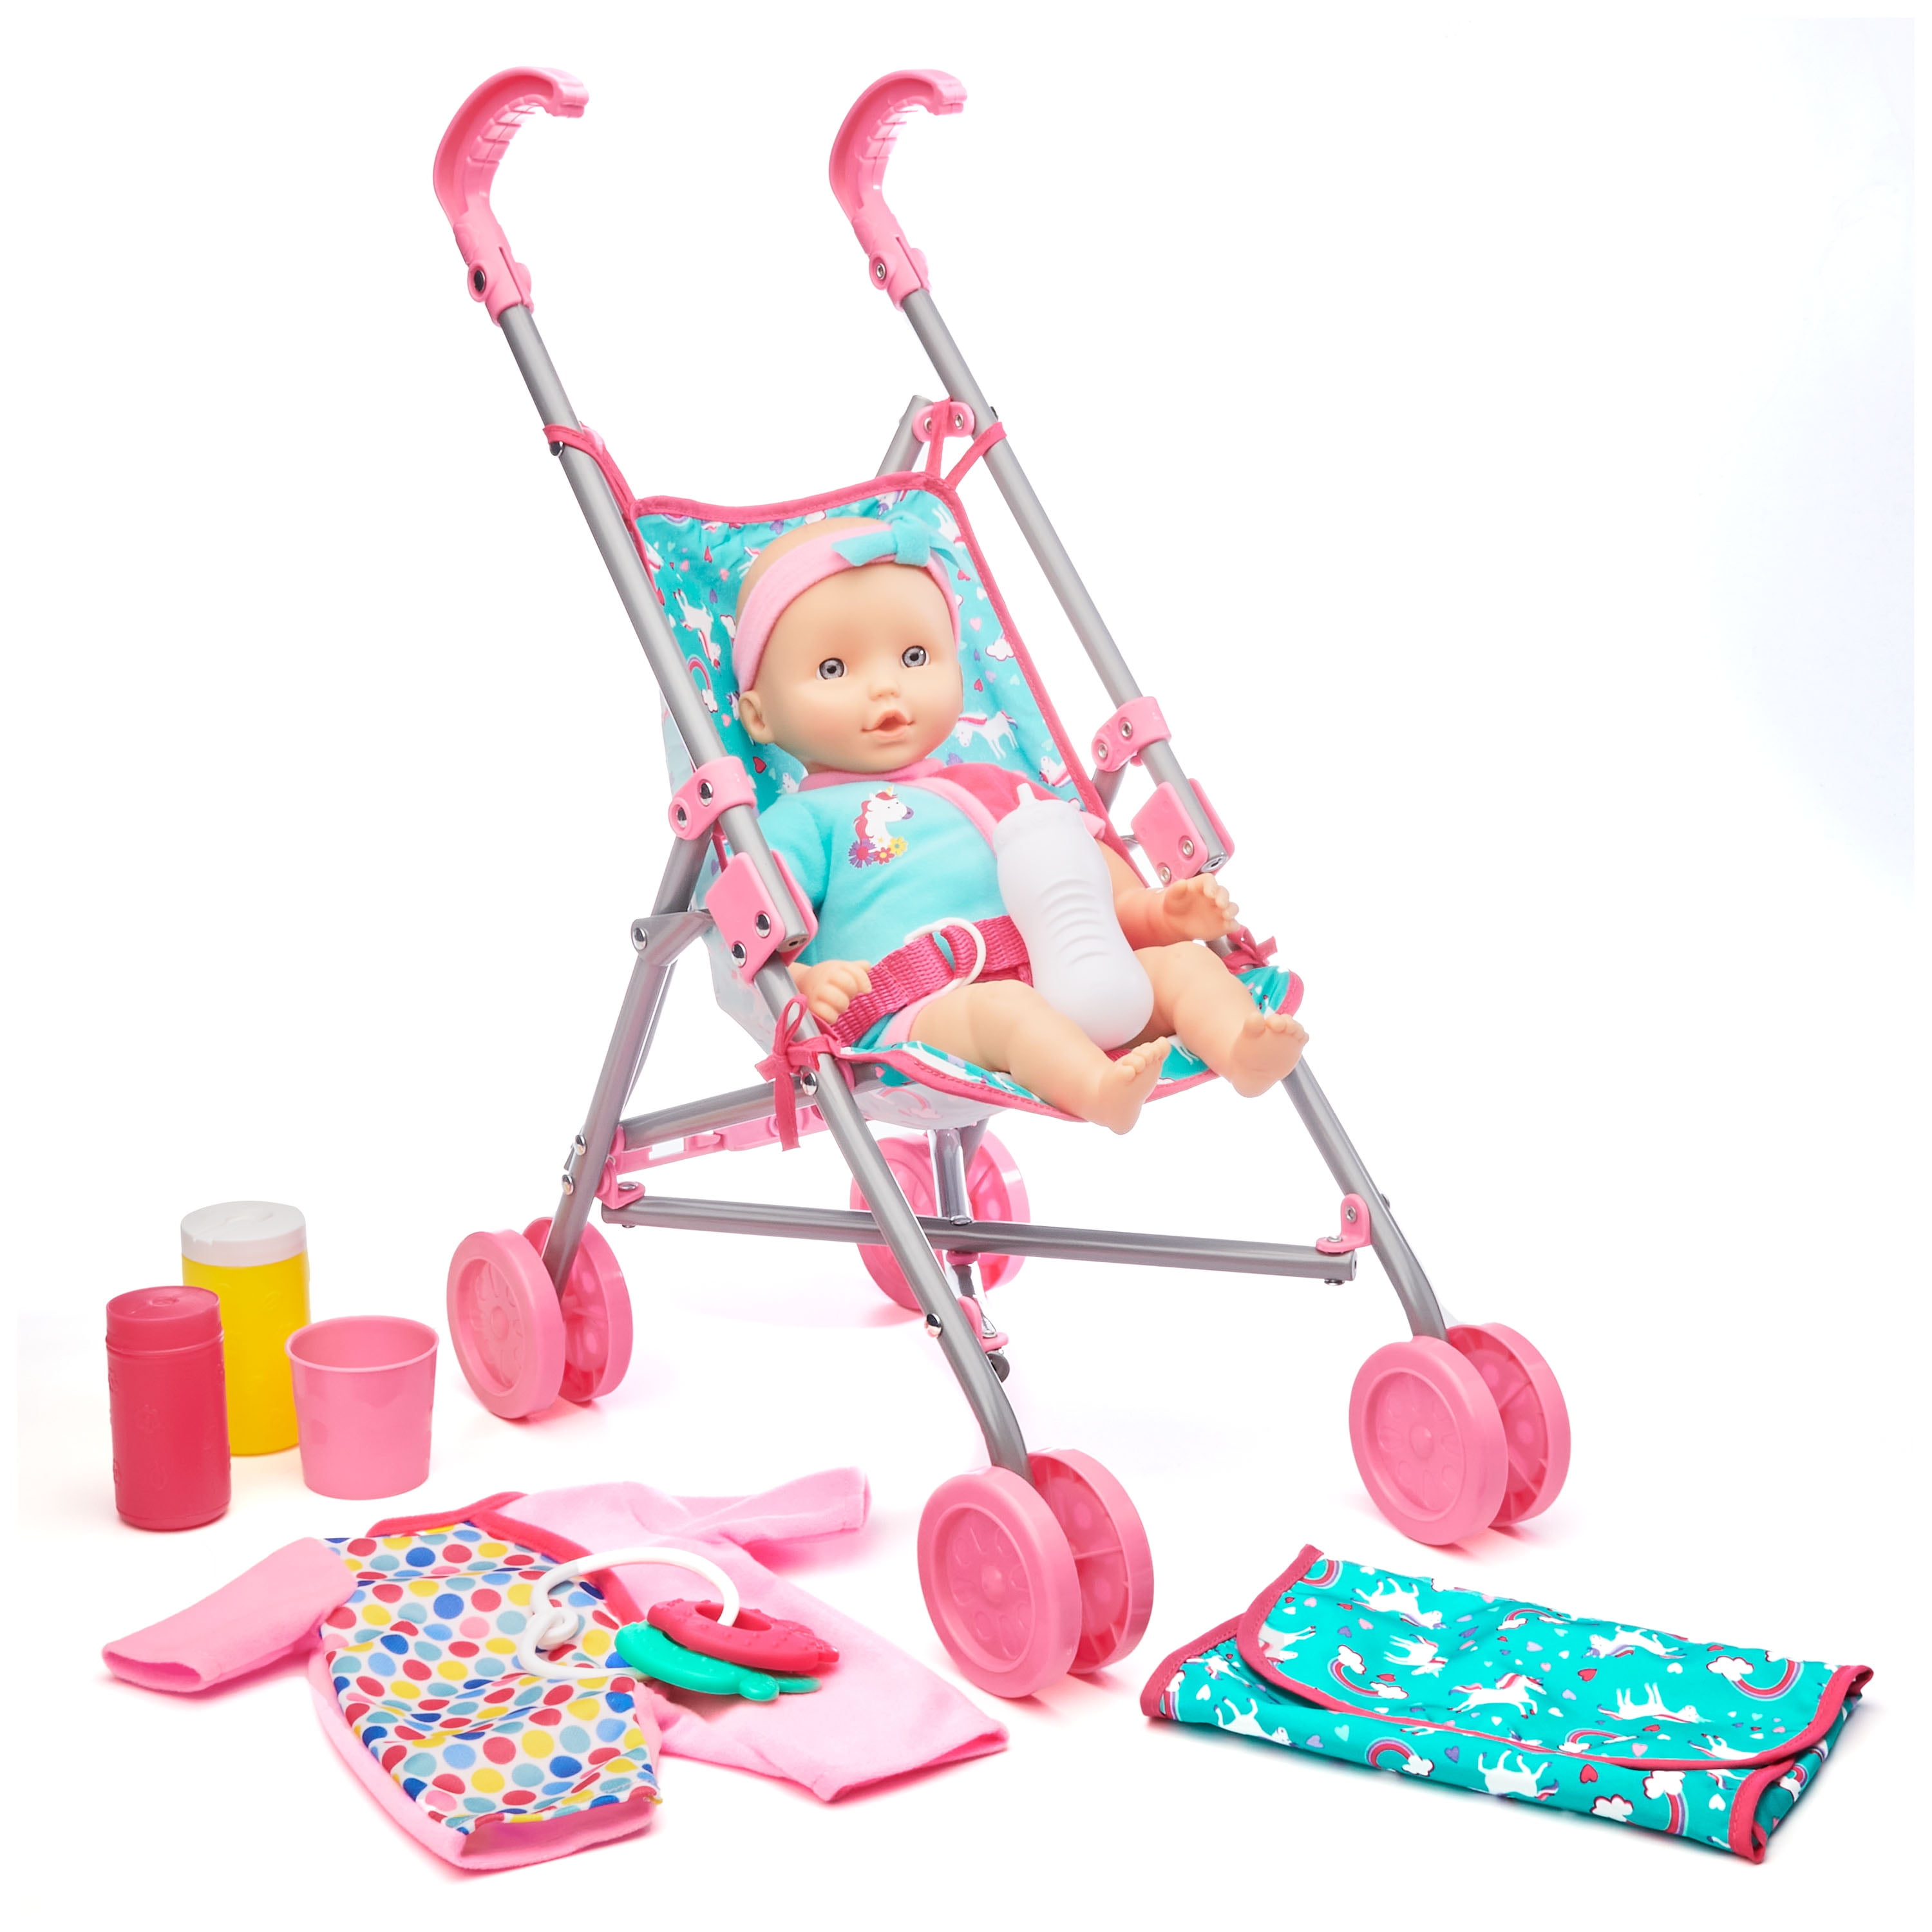 Kid Connection Baby Doll Stroller Set, Baby Doll Stroller With Removable Car Seat